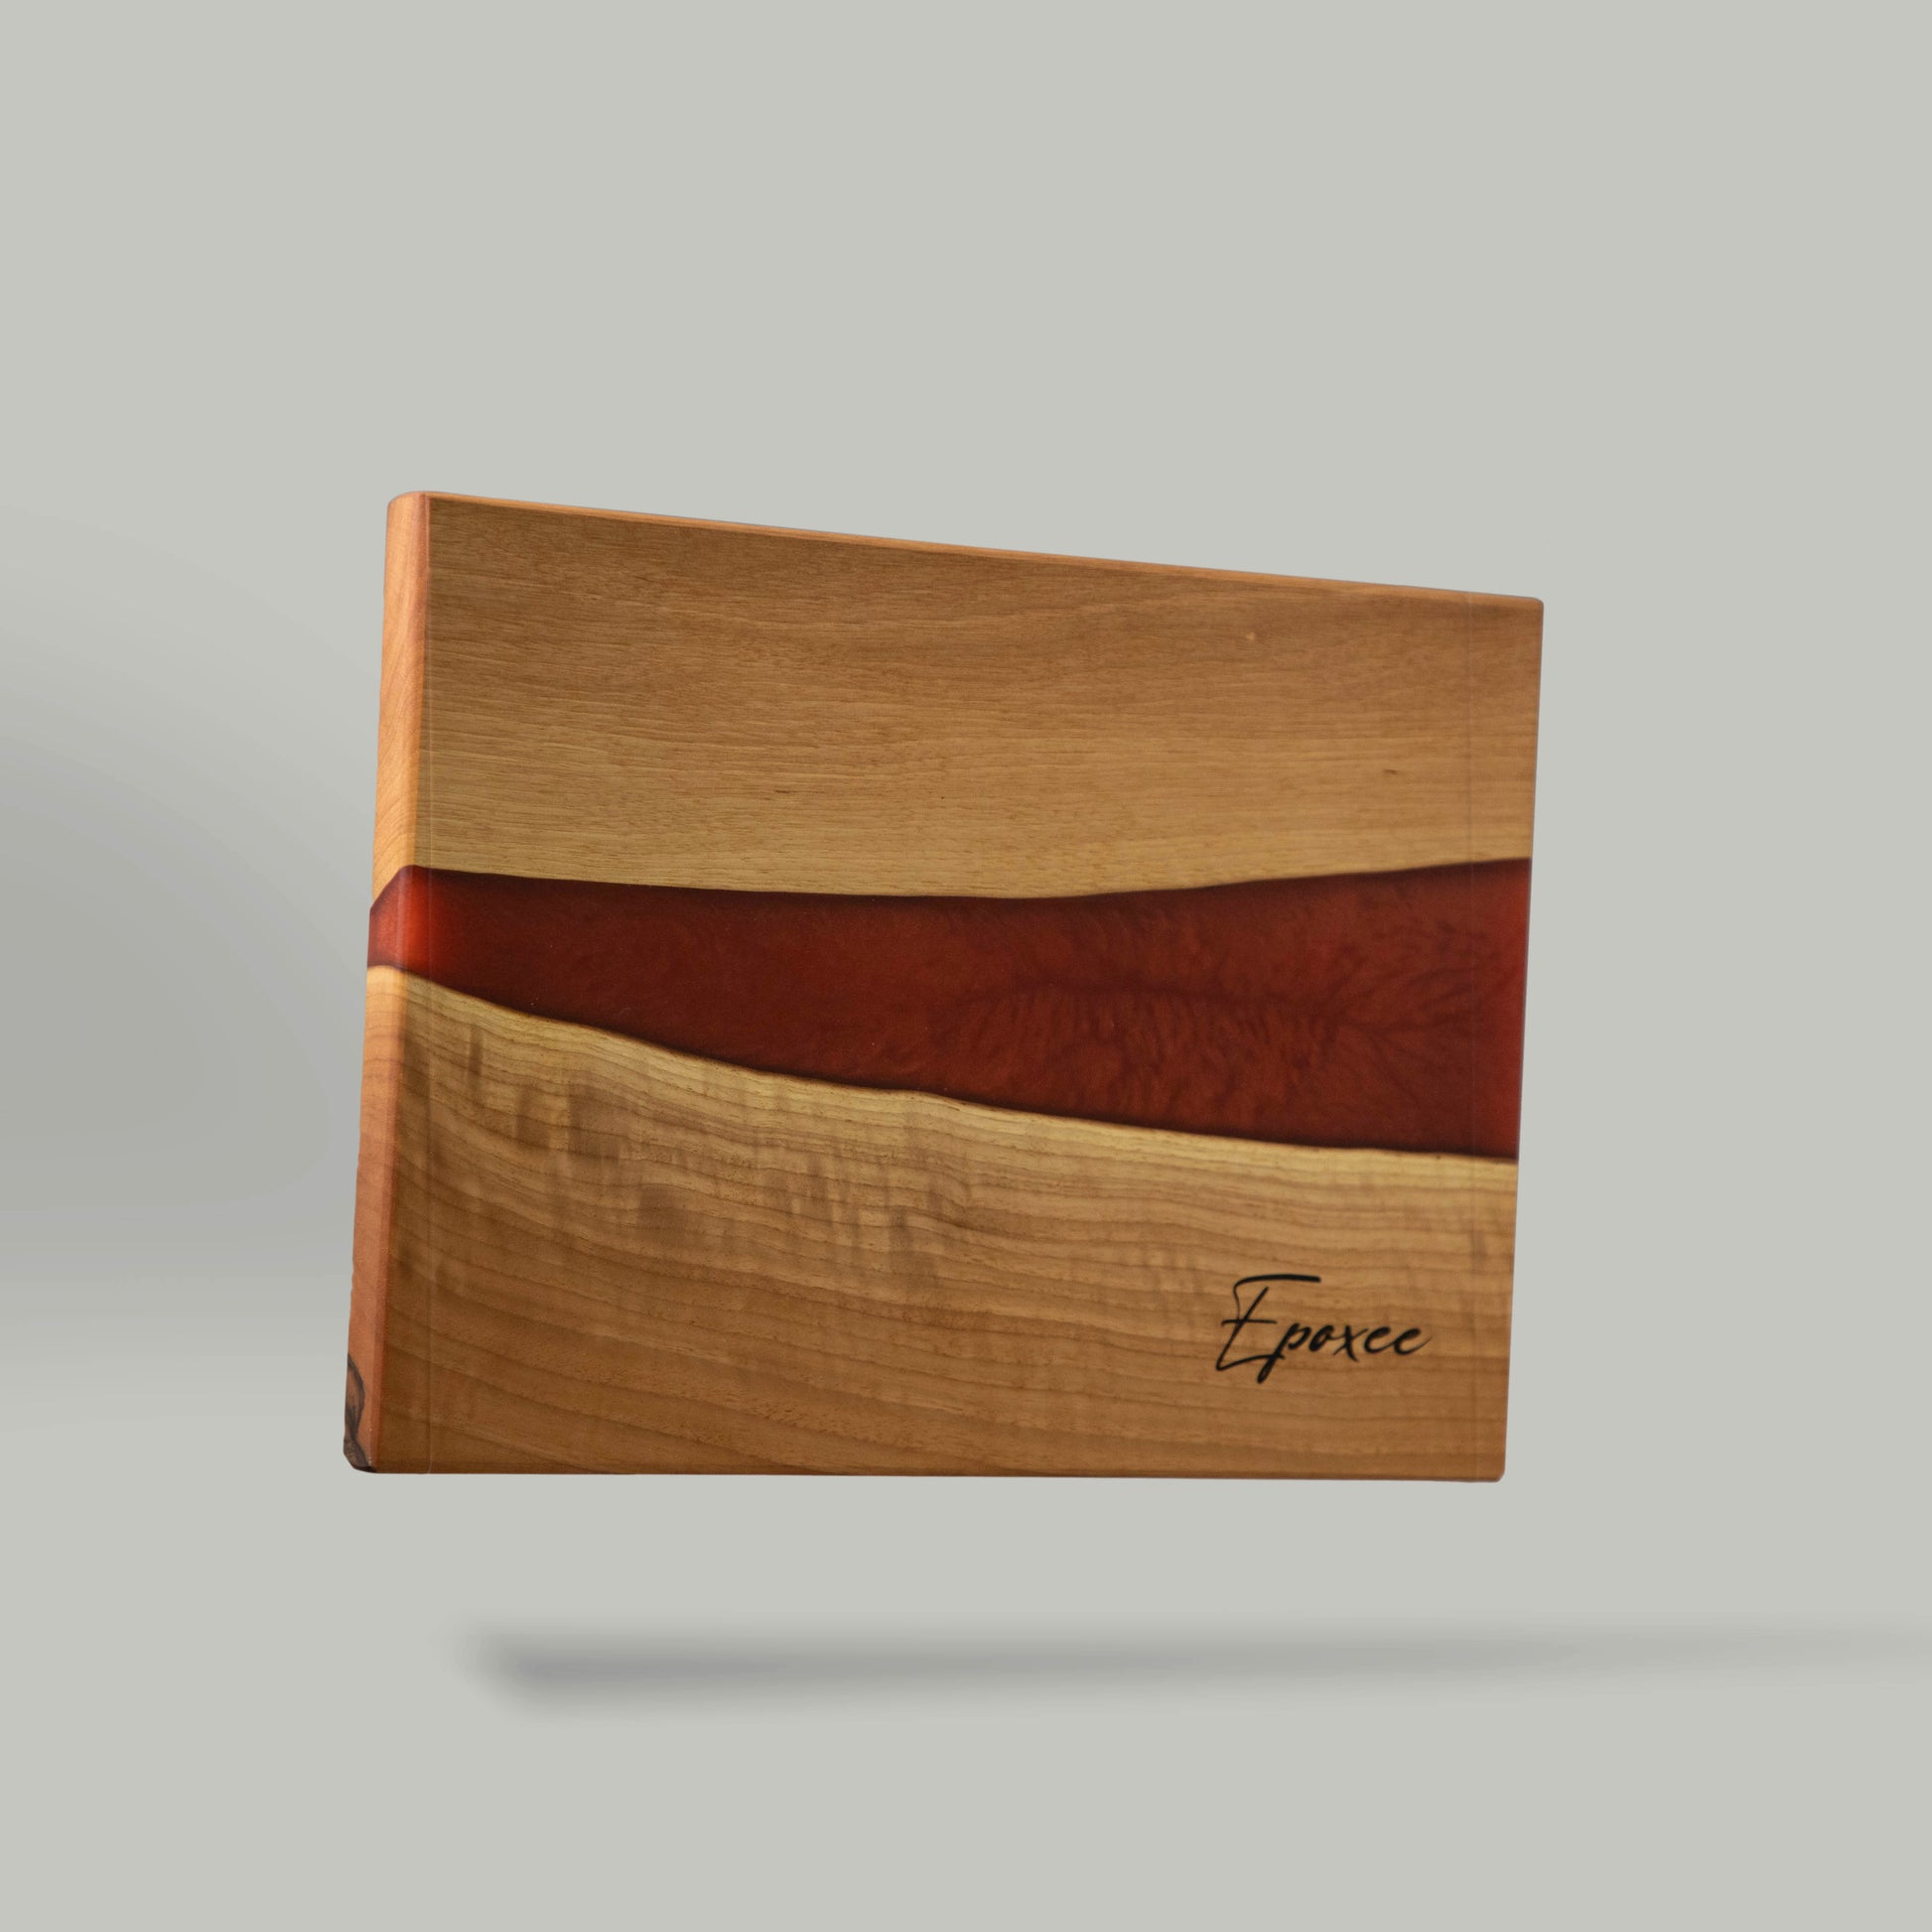 Serving board made from wood and epoxy resin in the color red orange